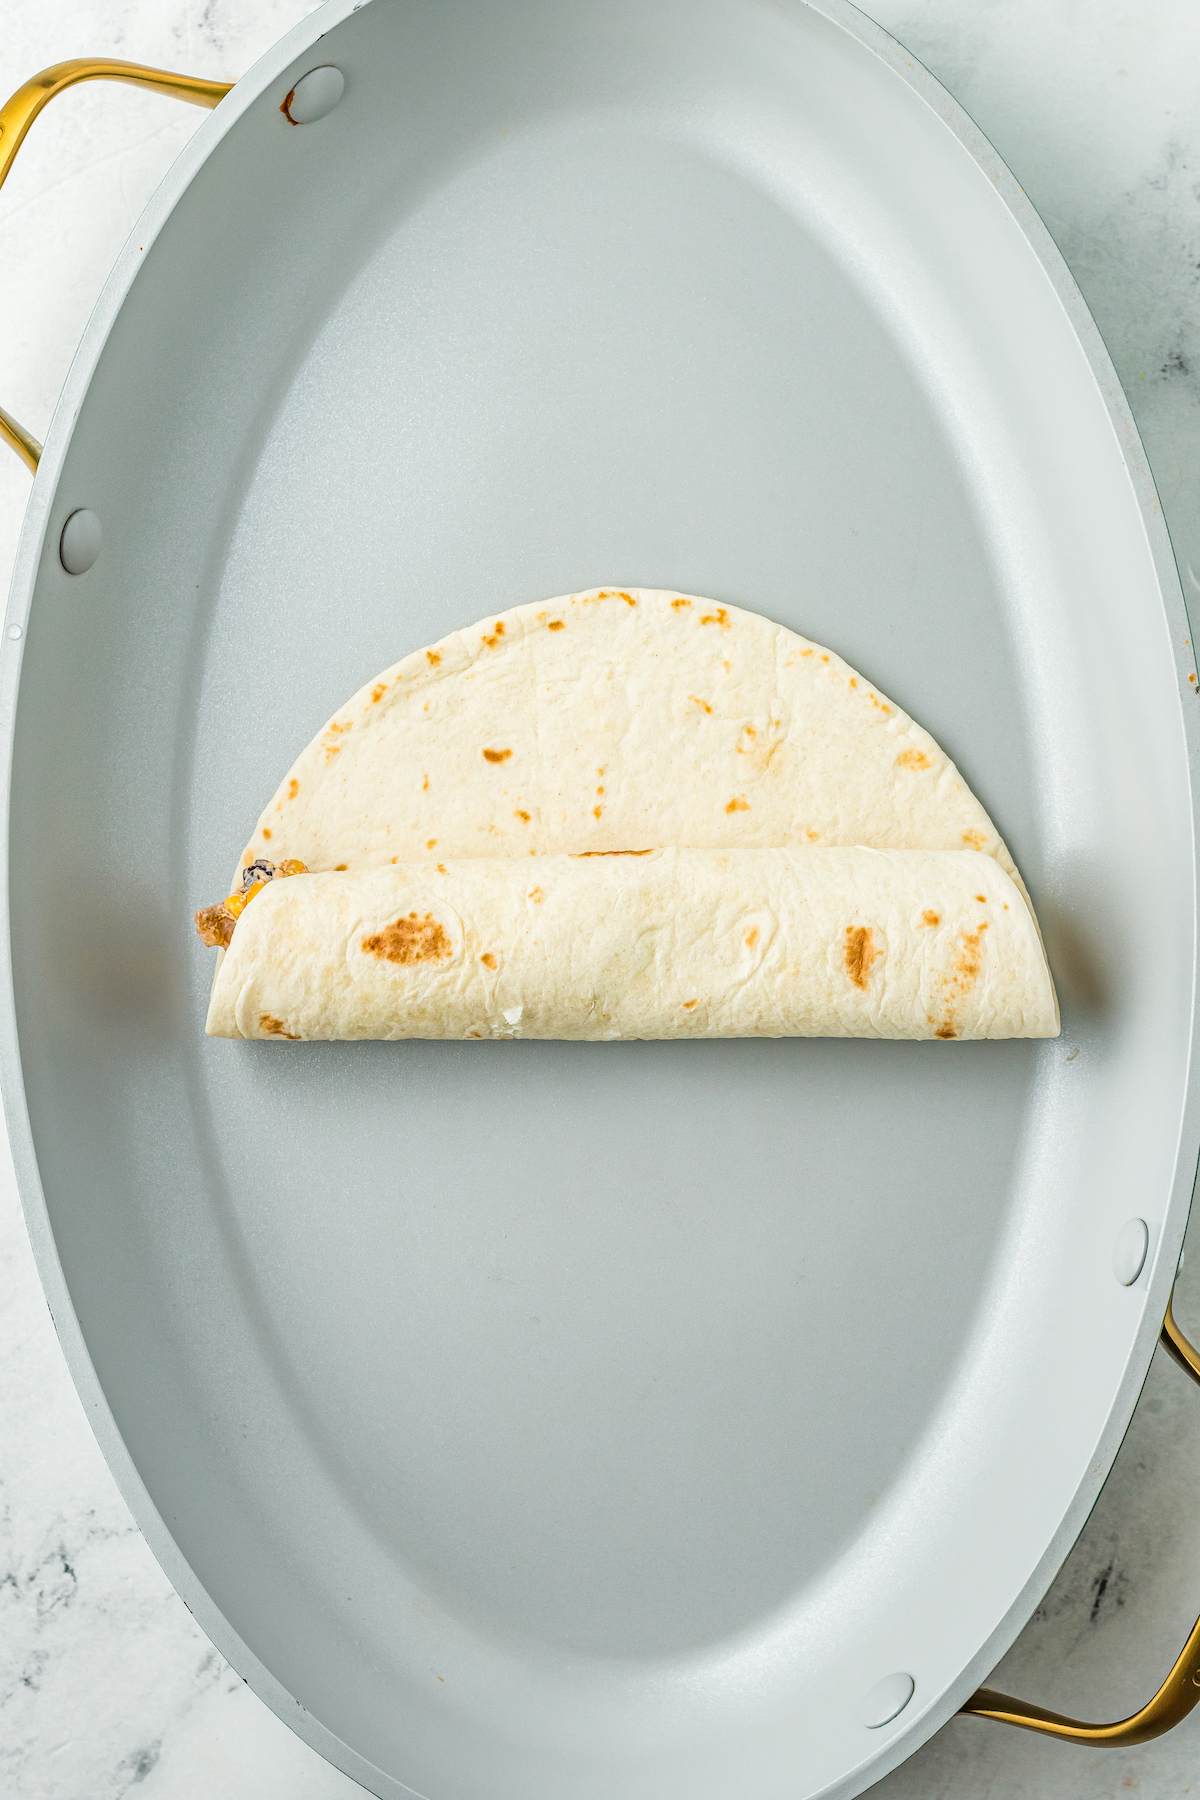 A tortilla being rolled up on a plate.